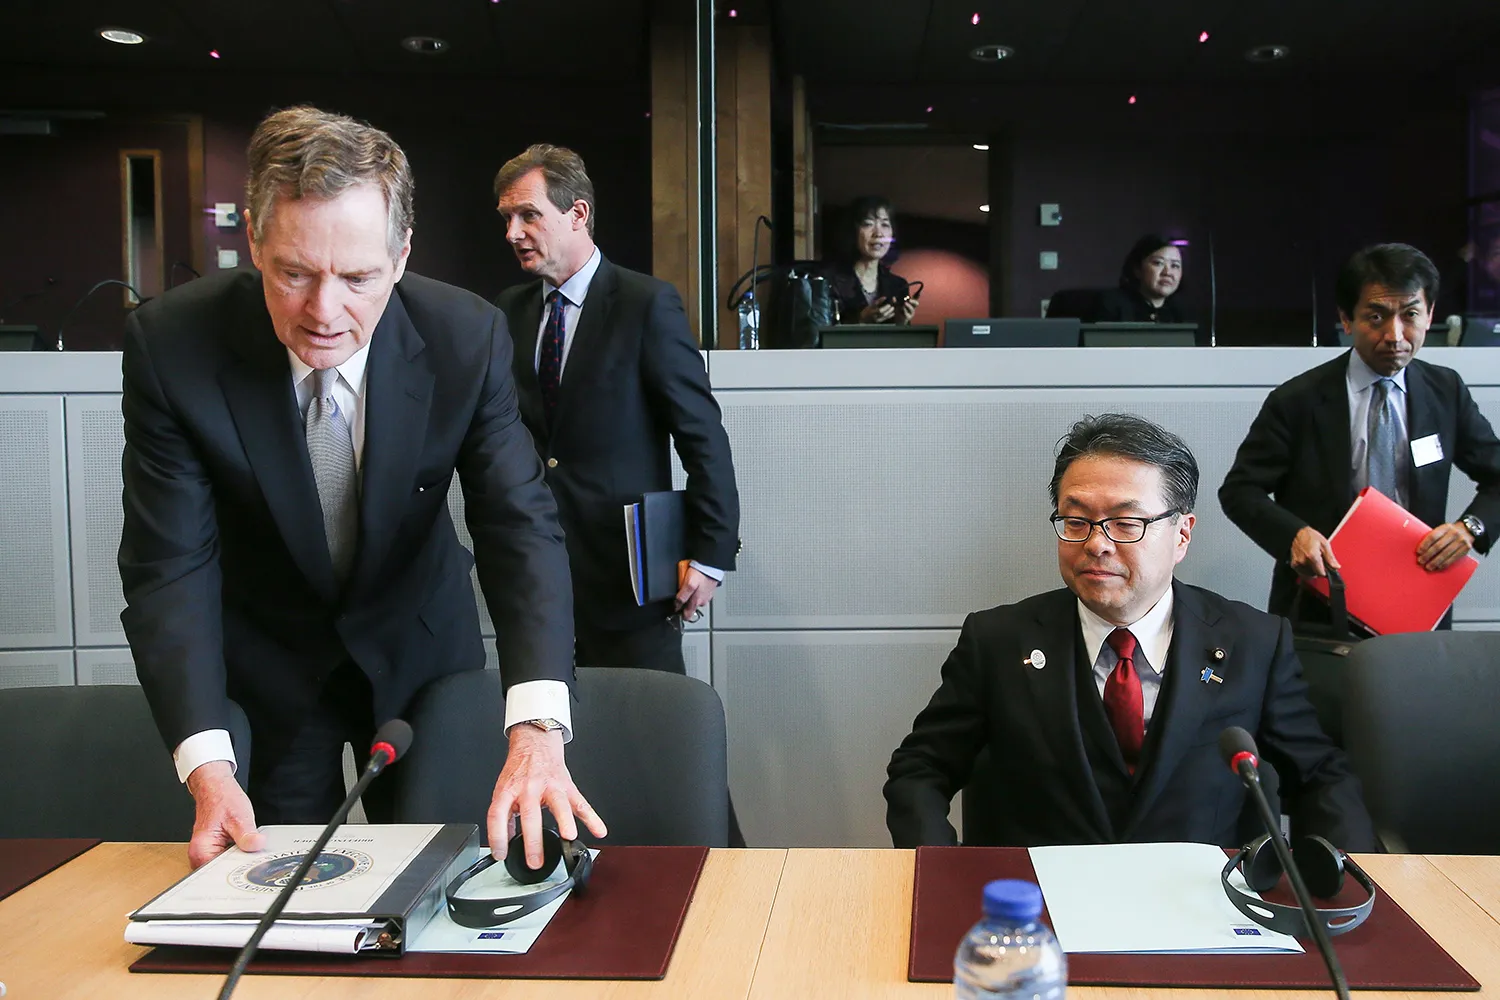 Robert Lighthizer, (left) in a suit and tie, leans over to place a binder and headsphones on a table in front of him as he prepares to sit next to the seated Japanese economy minister, also wearing a suit and tie. Behind them are two other staffers. Two other women are seen seated behind a low wall in the background.